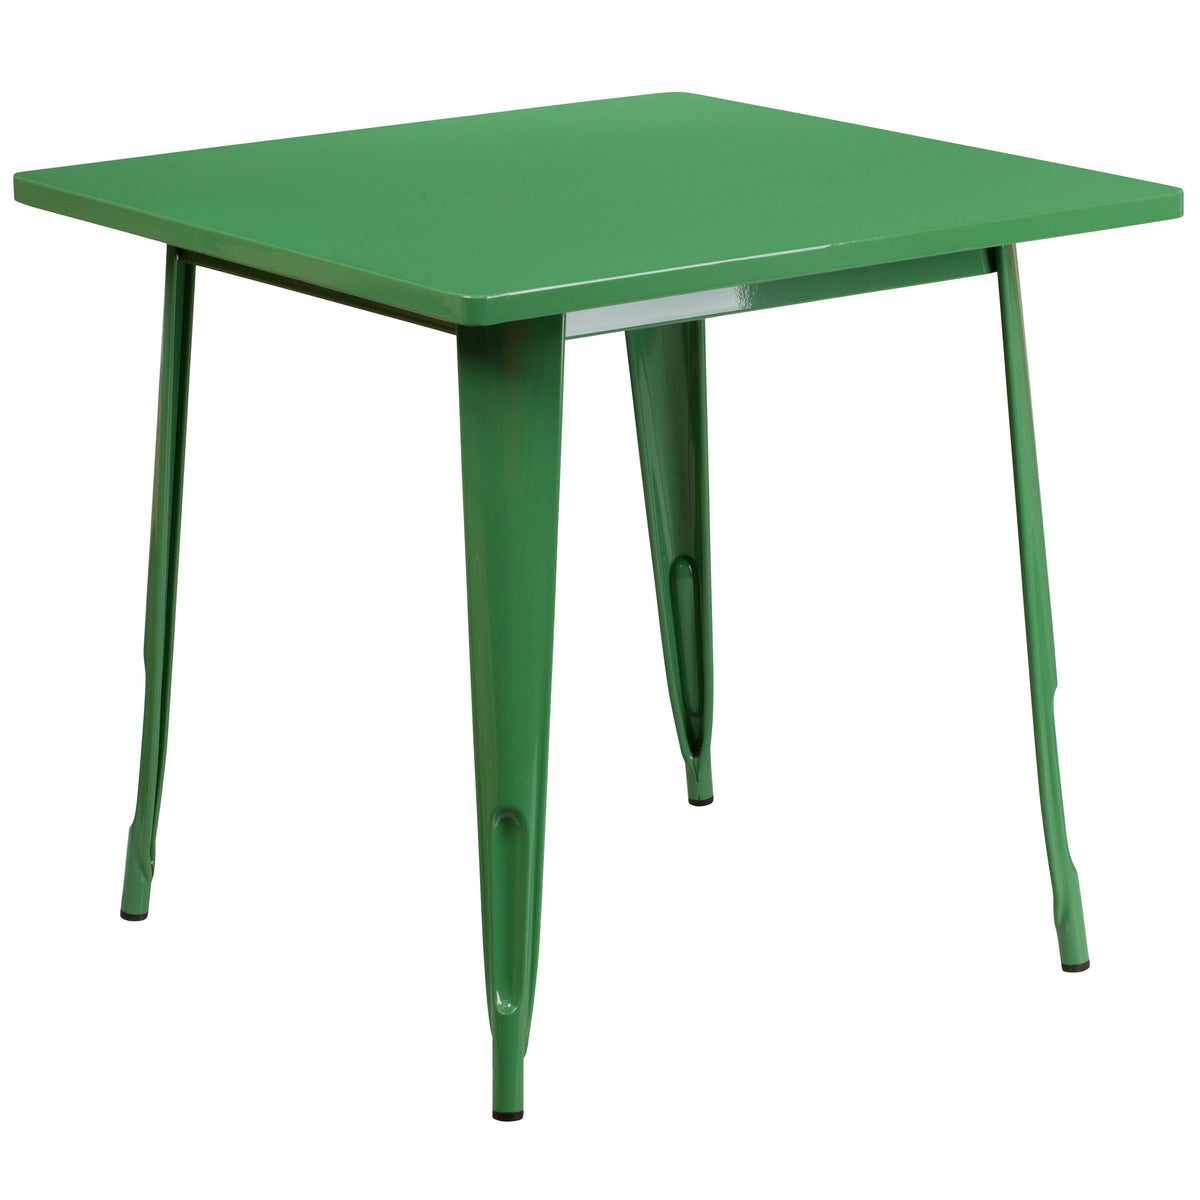 Green |#| 31.5inch Square Green Metal Indoor-Outdoor Table - Hospitality Furniture